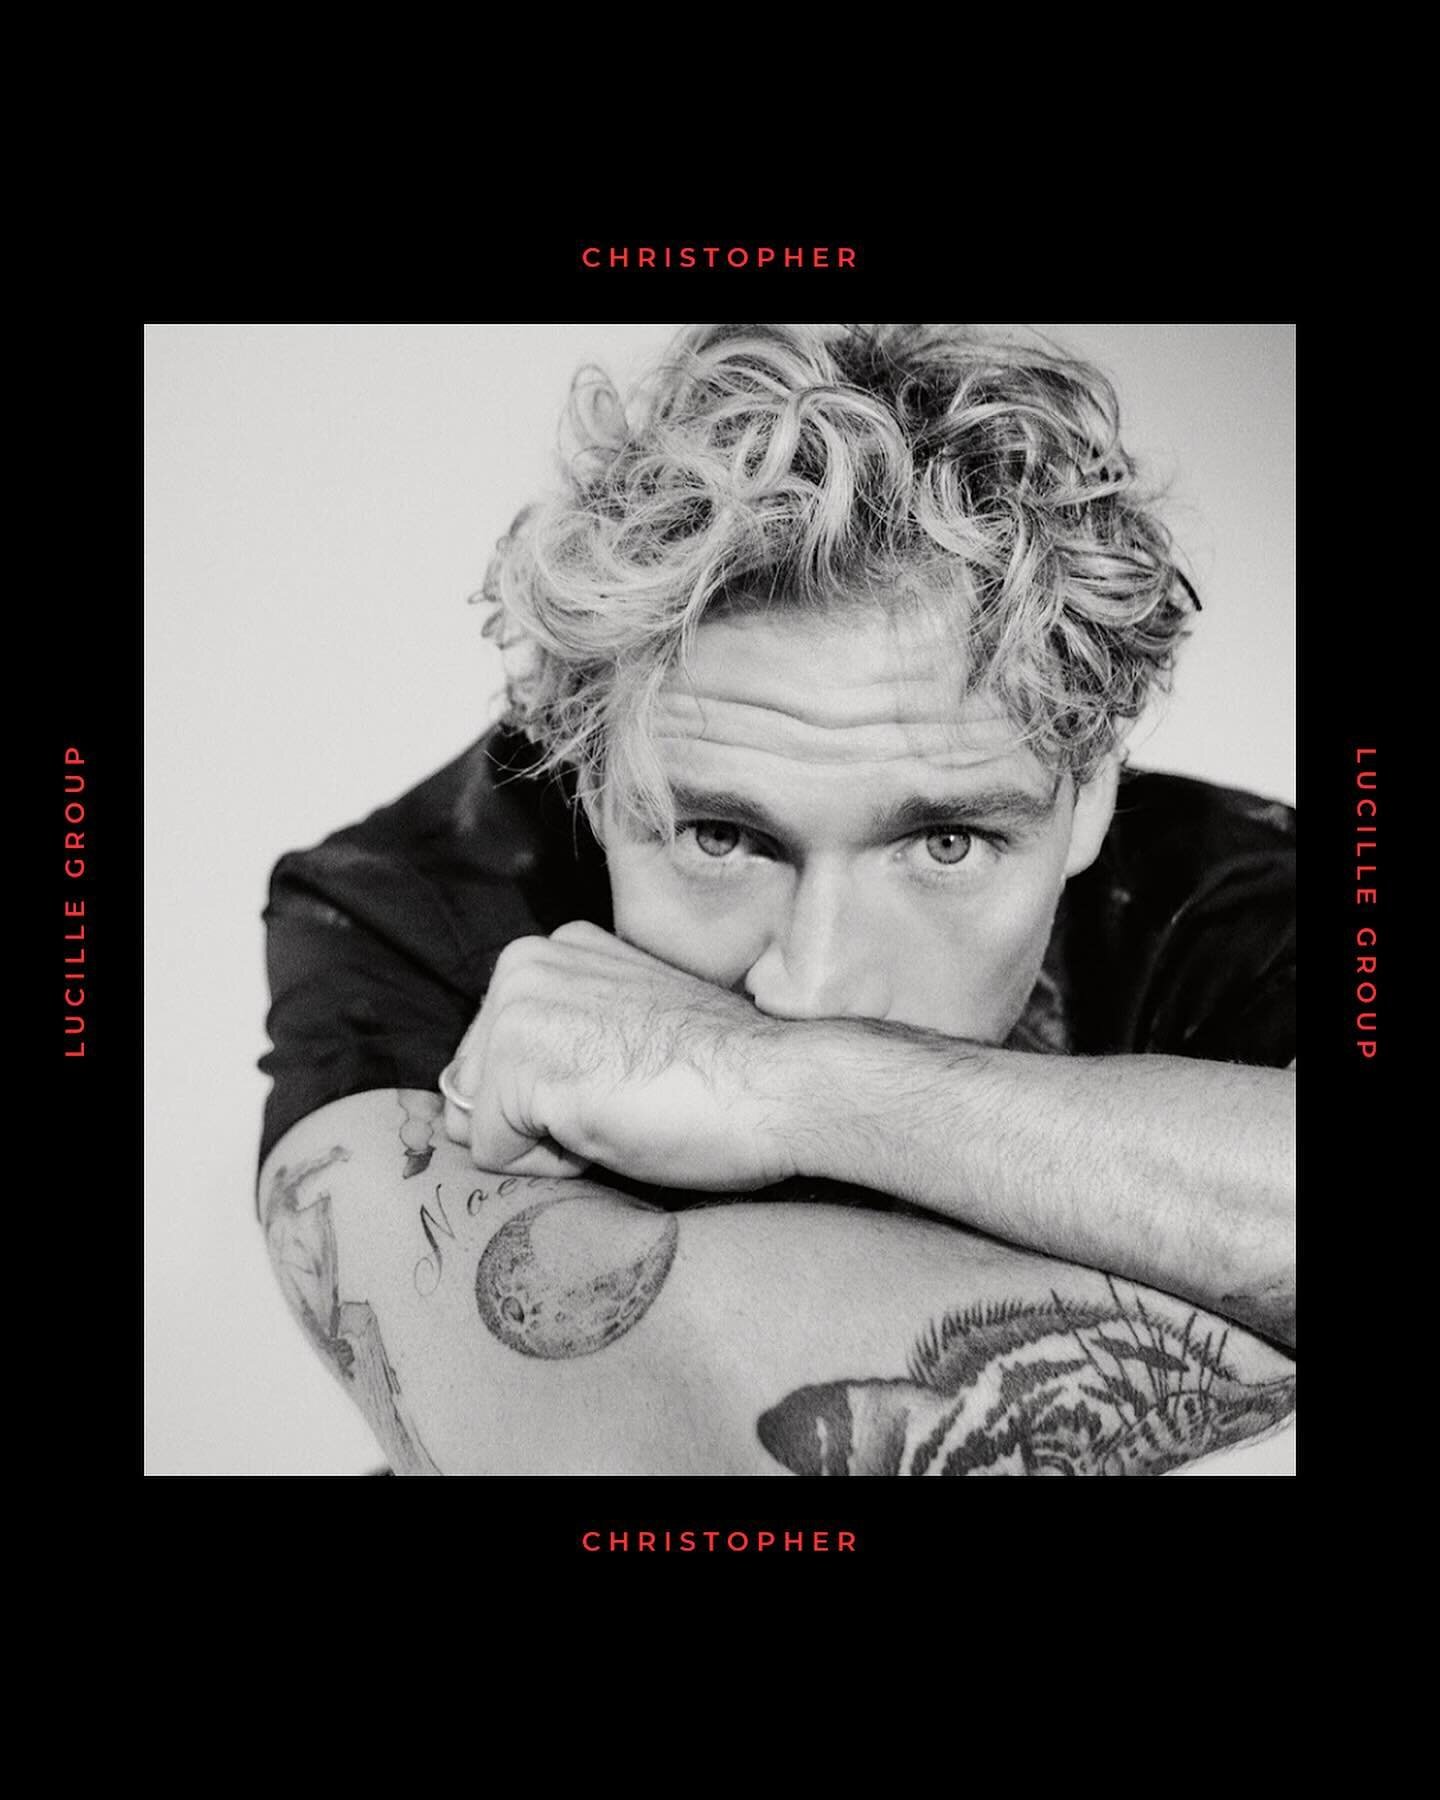 The Danish popstar Christopher has been one of the hottest names in our neighboring country for a long time, topping charts with hit singles like &ldquo;Bad&rdquo;, &ldquo;Leap Of Faith&rdquo; and &ldquo;Fall so hard&rdquo;. With multiple chart toppi